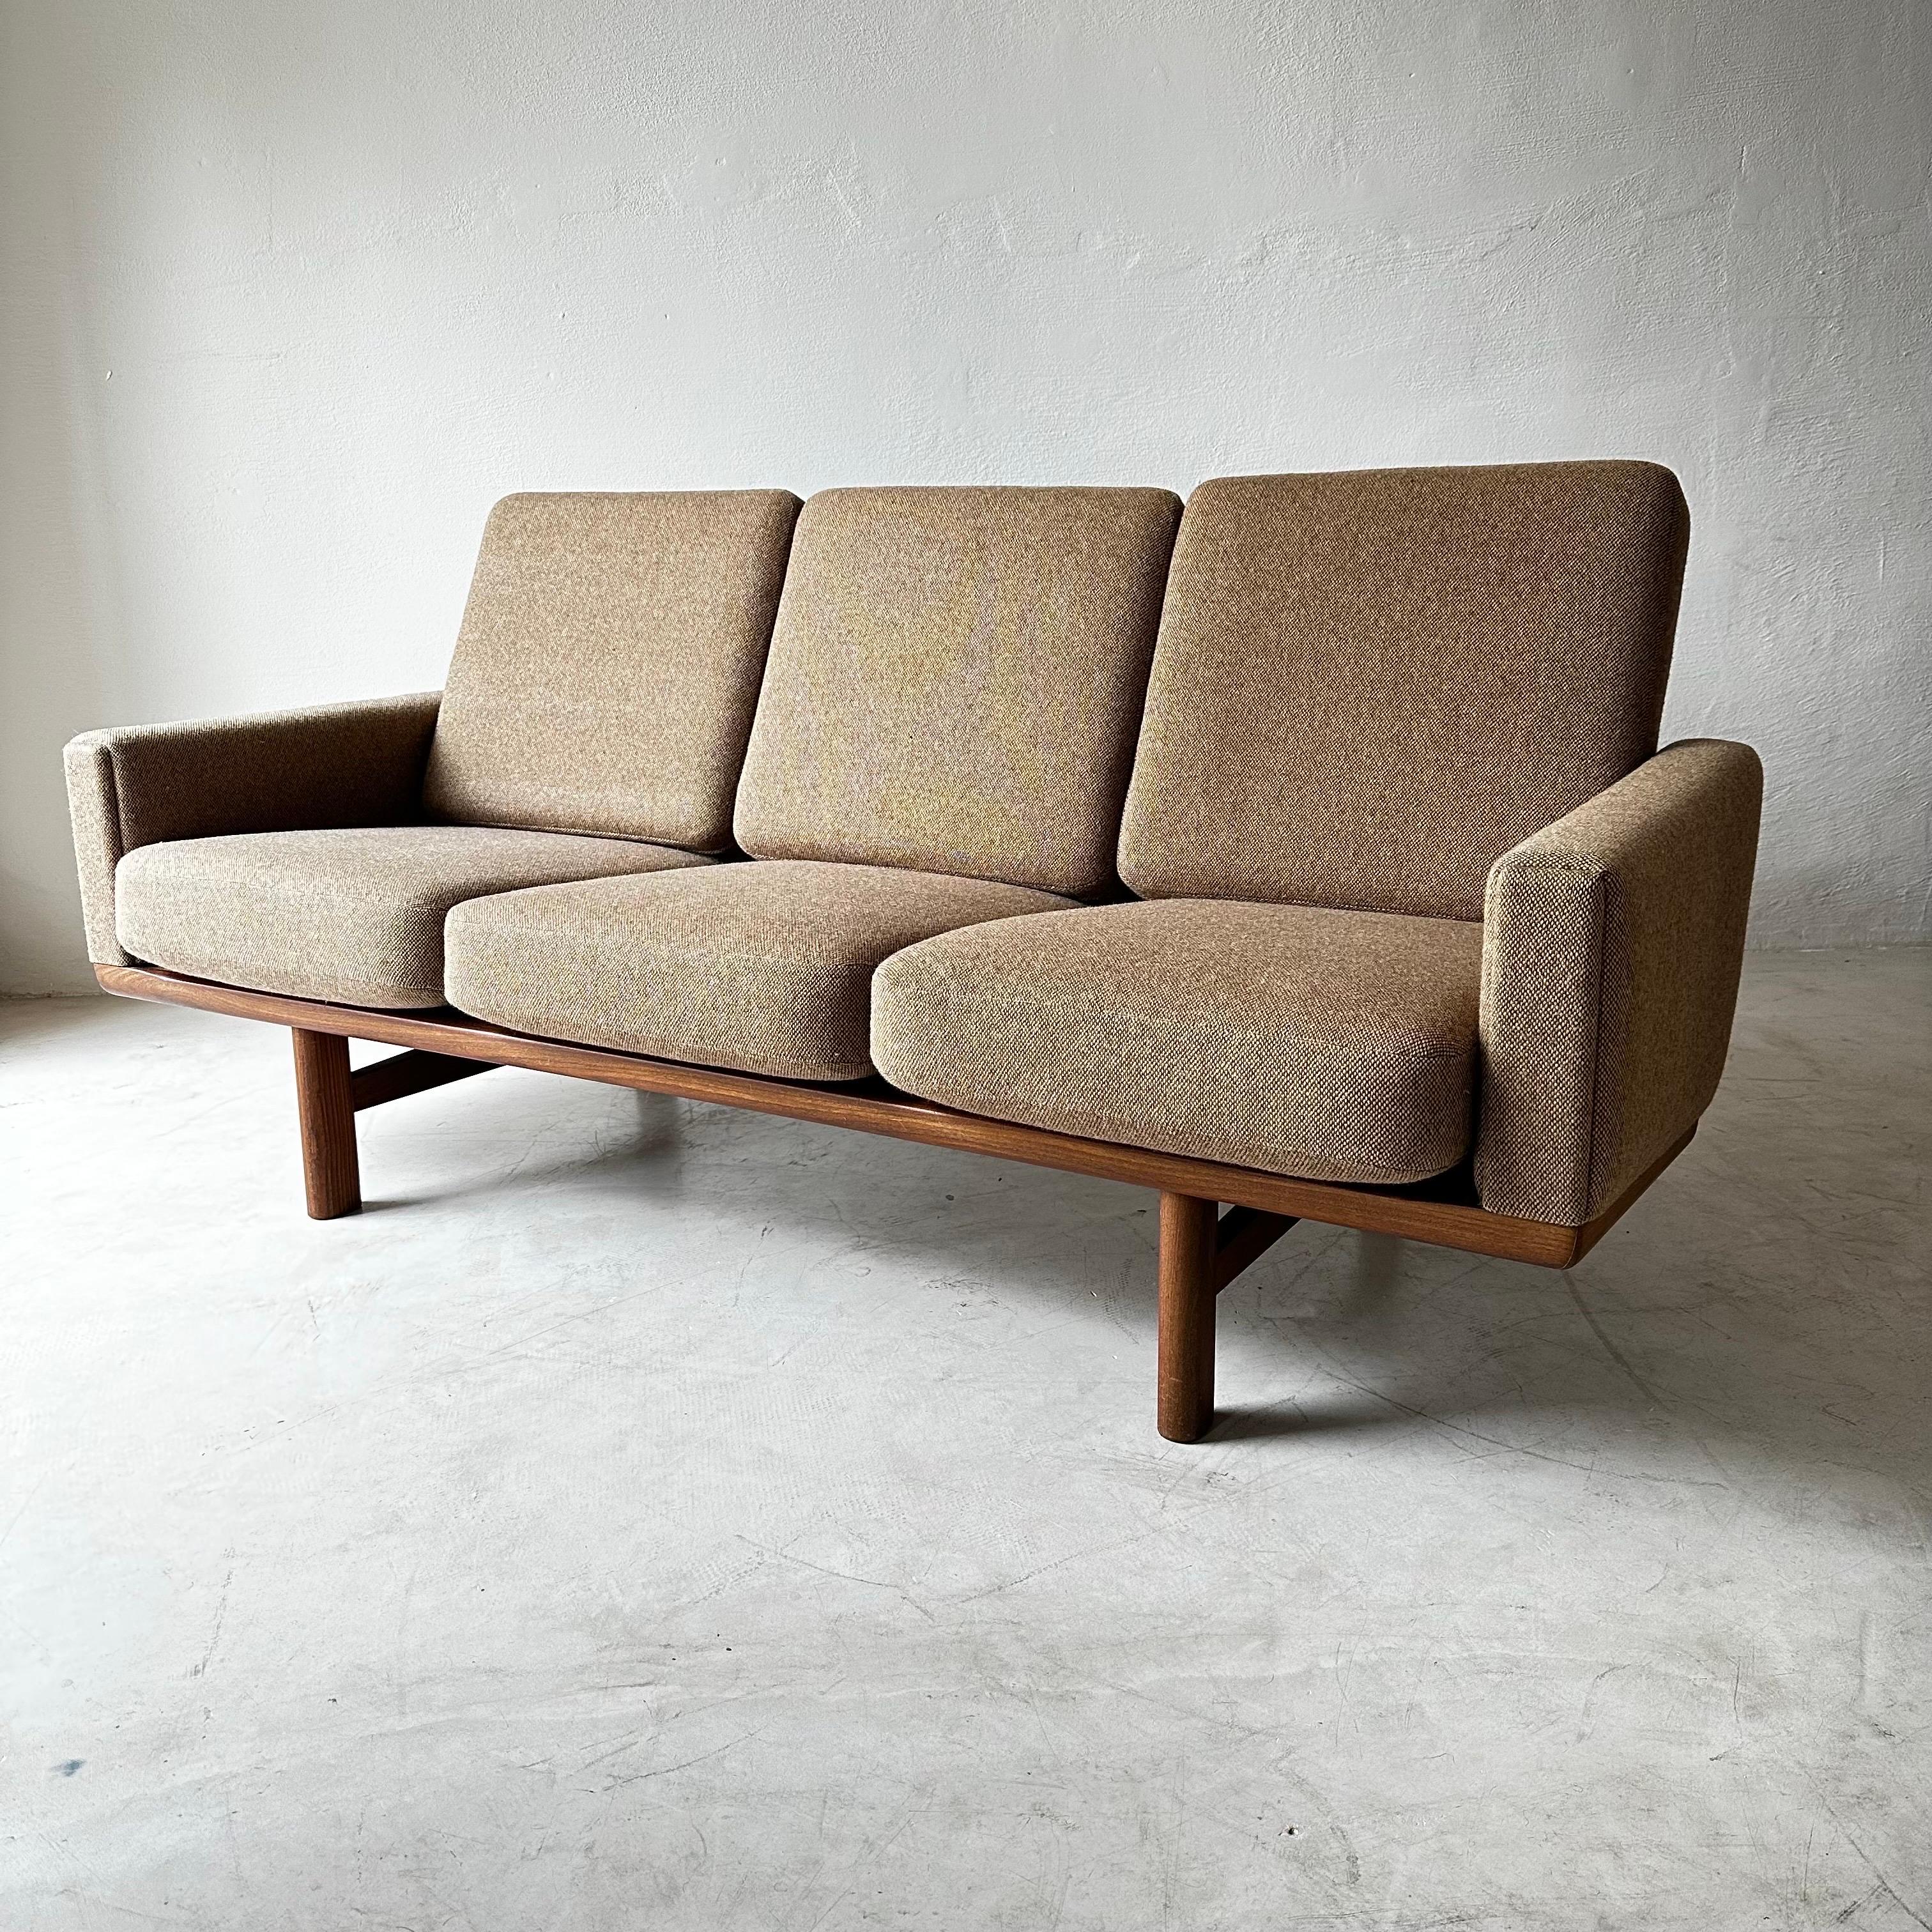 Hans Wegner designed this comfortable three-seat sofa, model GE-236, for GETAMA in the mid-1950s. It features an angled solid teak frame whose slats create a handsome lattice in back. Original upholstery in gently used condition, ready to be